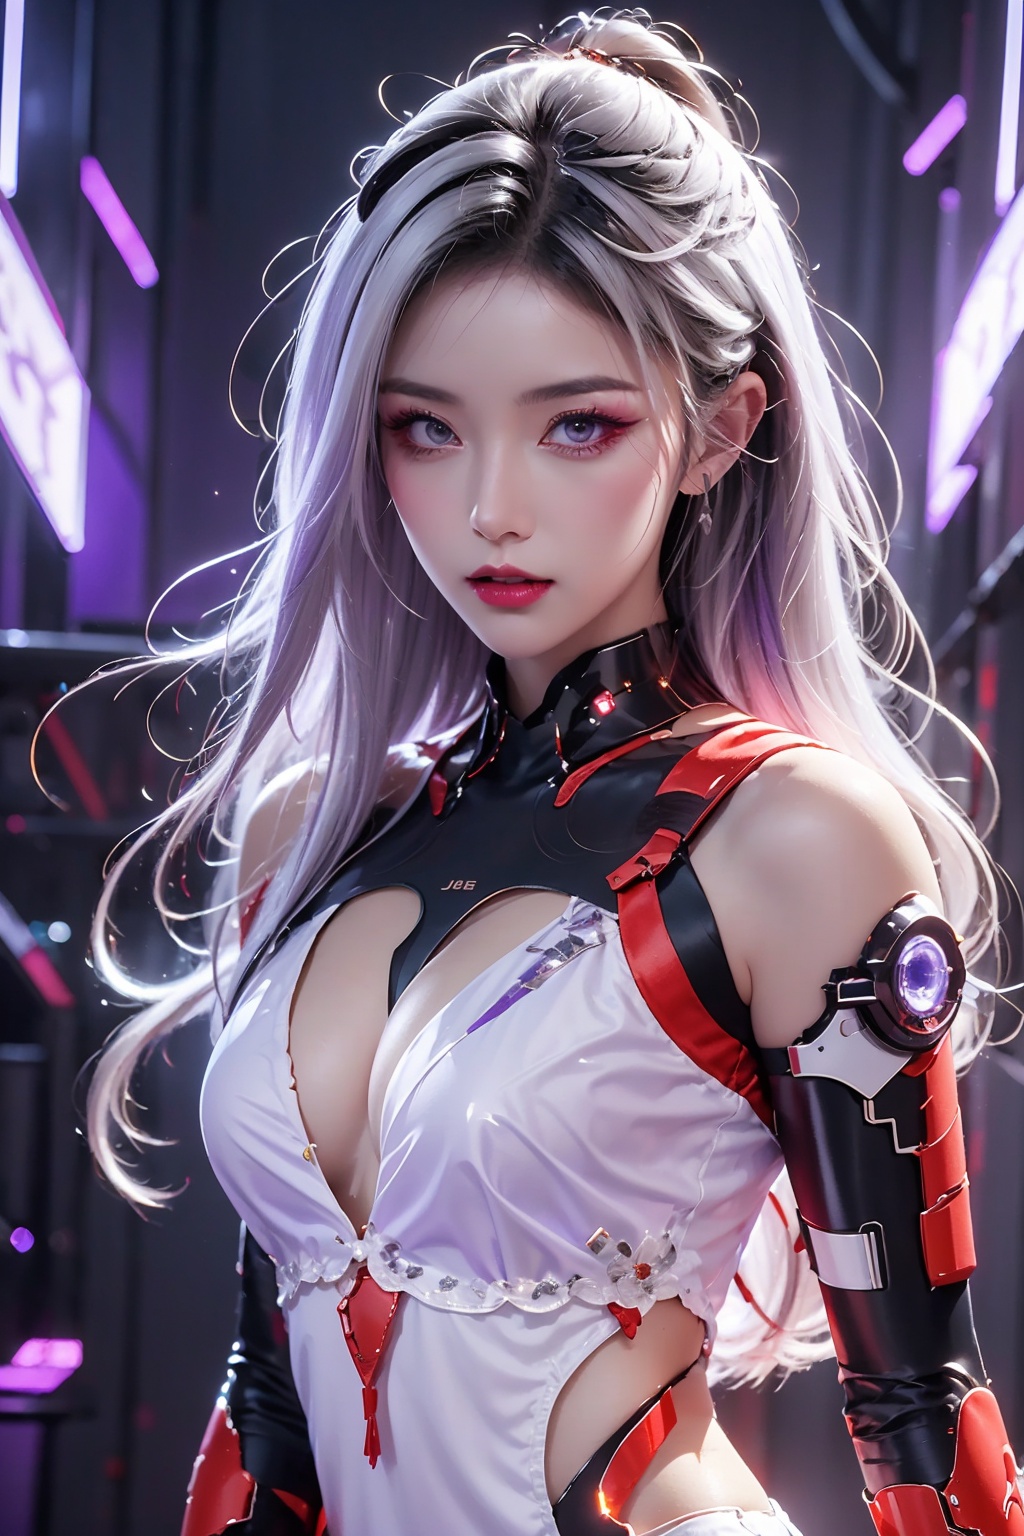 best quality, 8k, concept art, Thought-Provoking Aunt of Blood, intricate details, JoJo pose, Straps, Rings, Gloves, Low shutter, (Violet power aura:1.2), most beautiful artwork in the world, White hair,aesthetics, atmosphere, (neon,cyborg:1.1), fantasy, depth of field